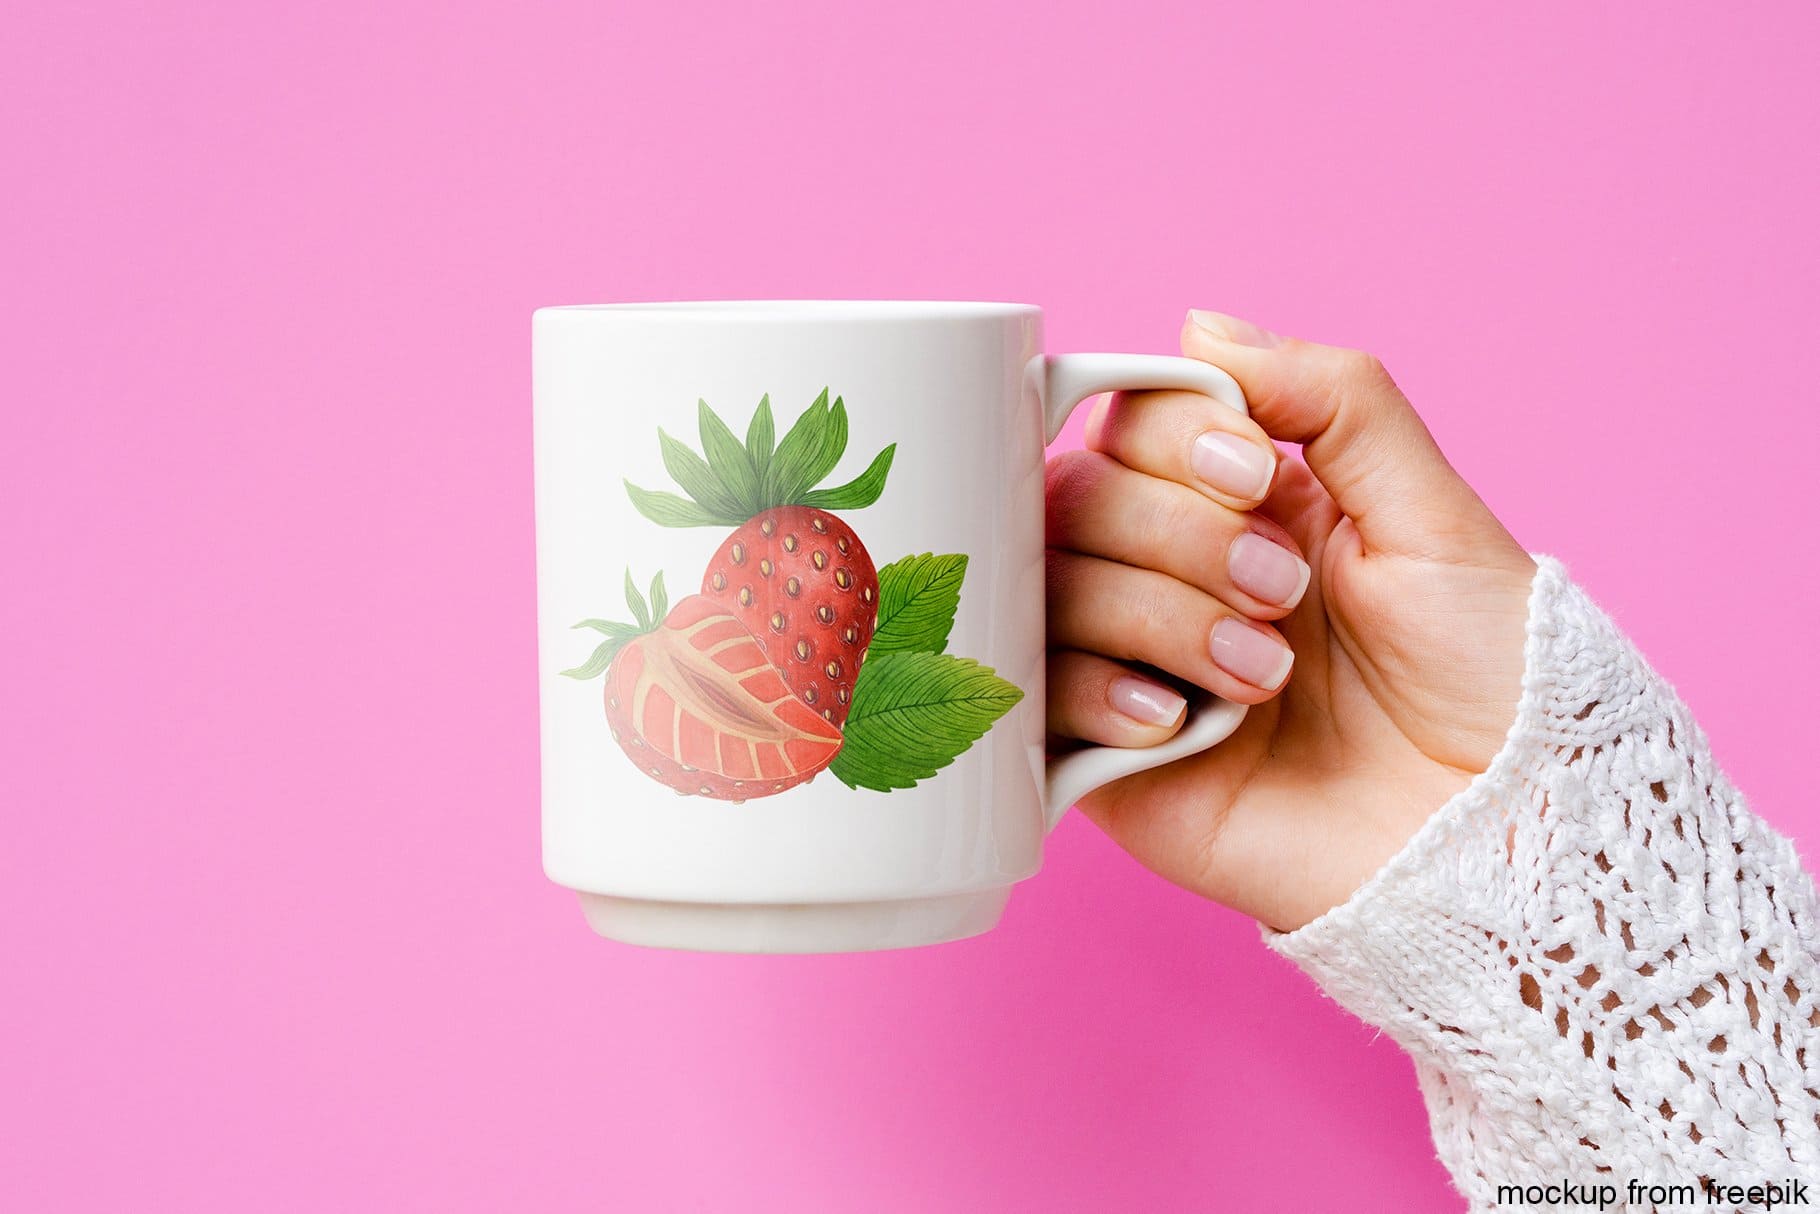 A white cup with drawn strawberries is depicted on a pink background.